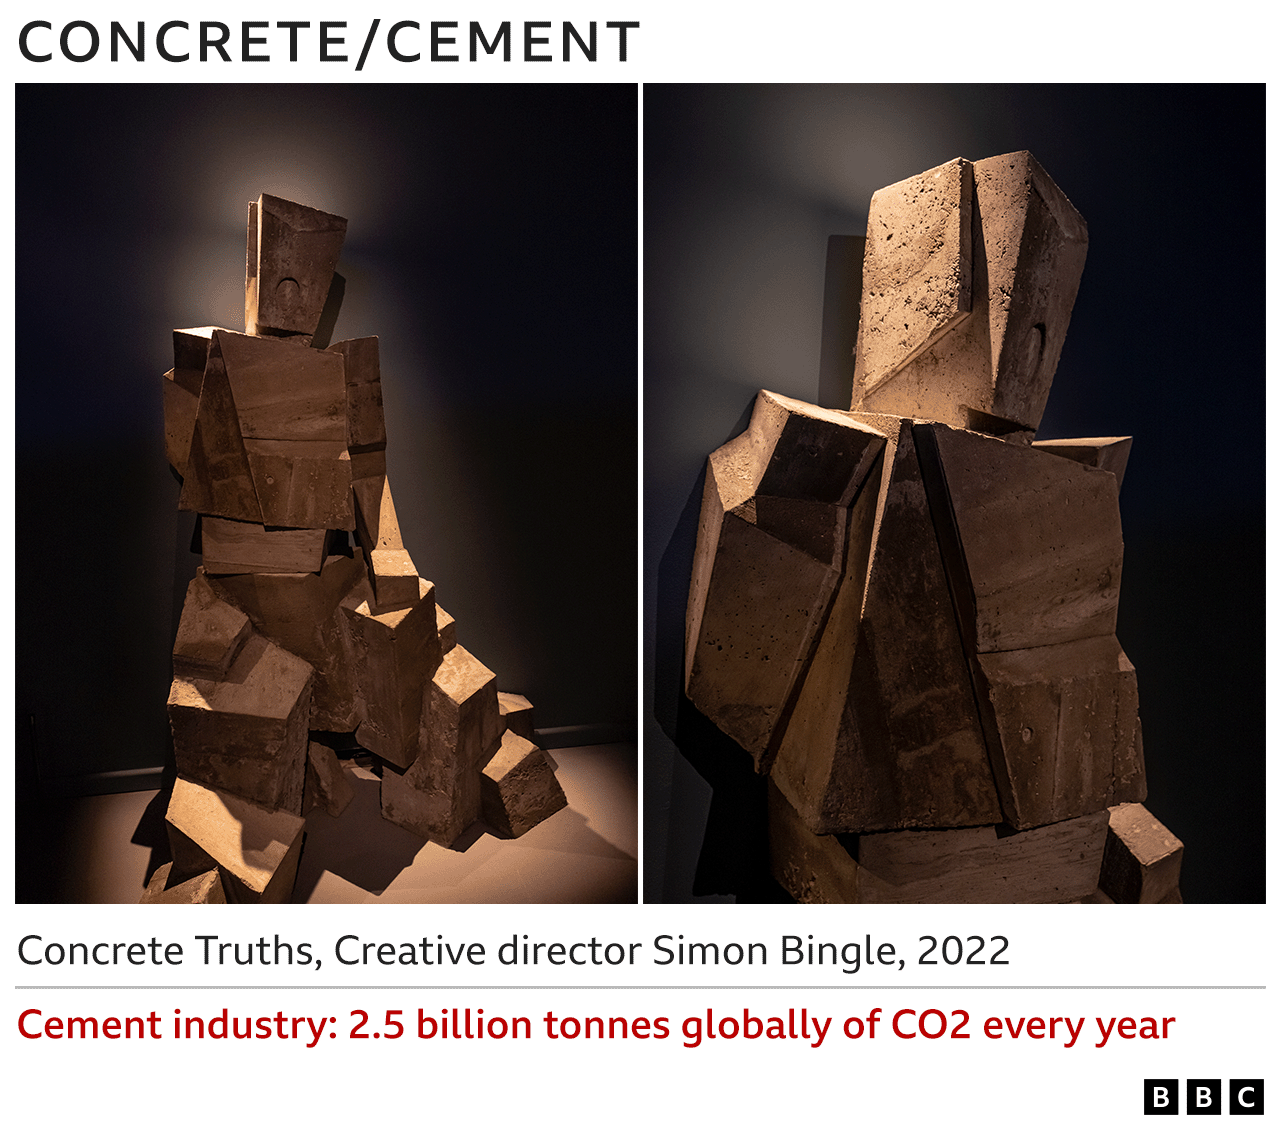 Images of concrete sculpture - Concrete Truths, Simon Bingle, 2022 - Cement industry 2.5bn tonnes globally of CO2 every year